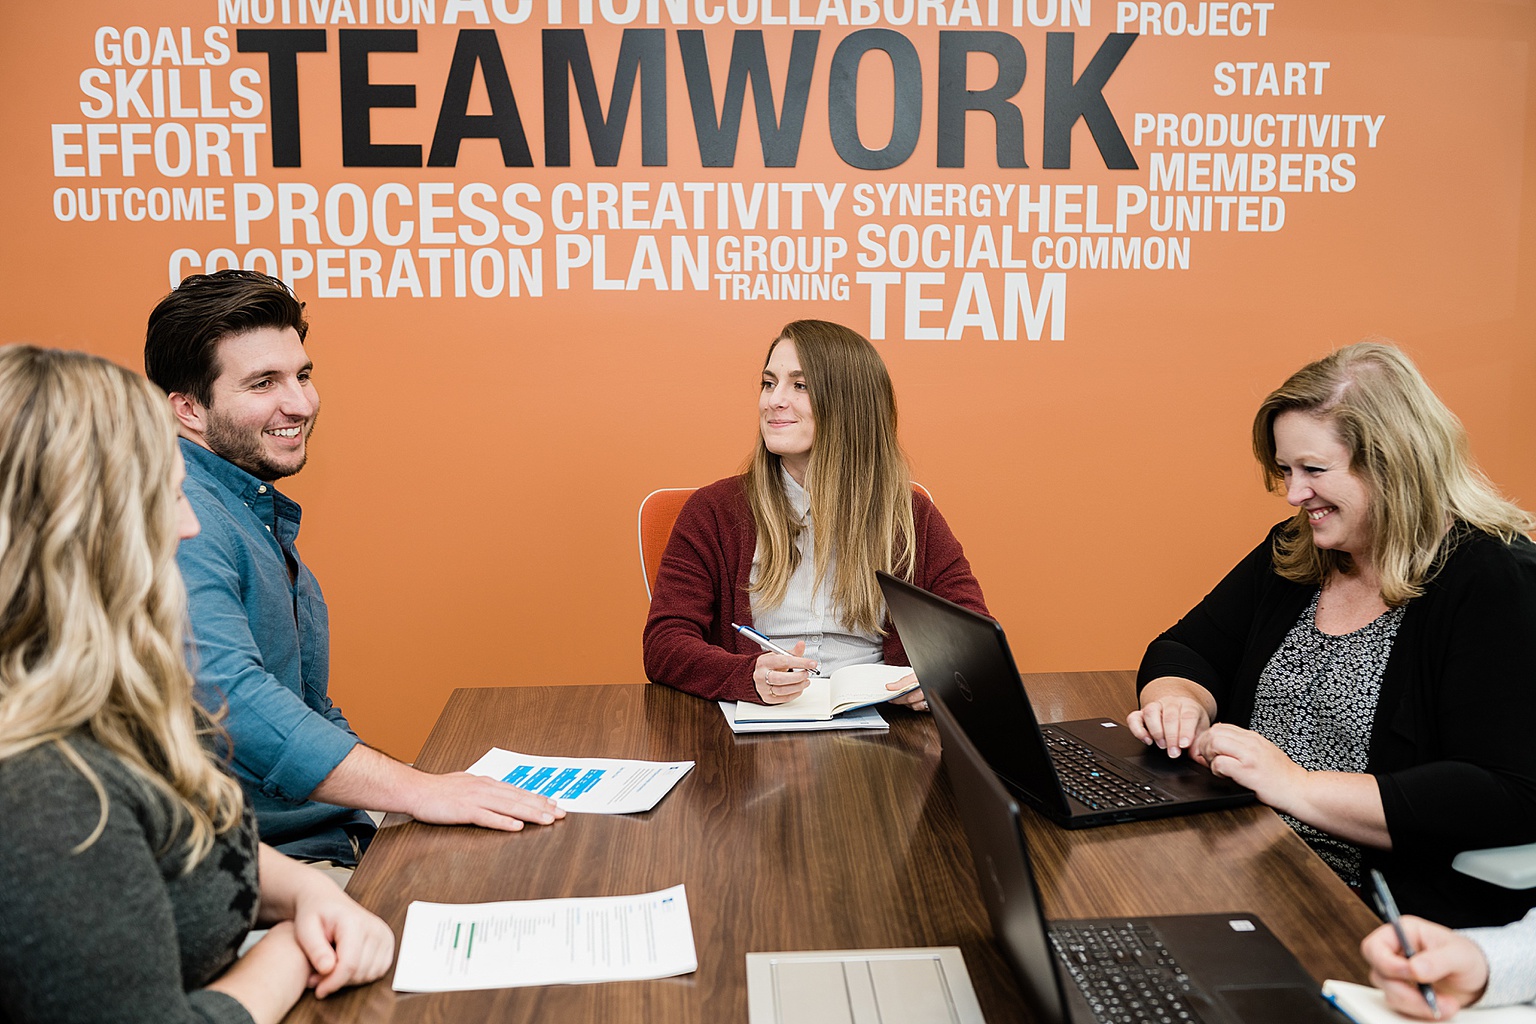 Lansing commercial photography - photos of team members around a table talking to each other with an orange wall behind them, by Allie Siarto & Co., Lansing branding and commercial photographer 